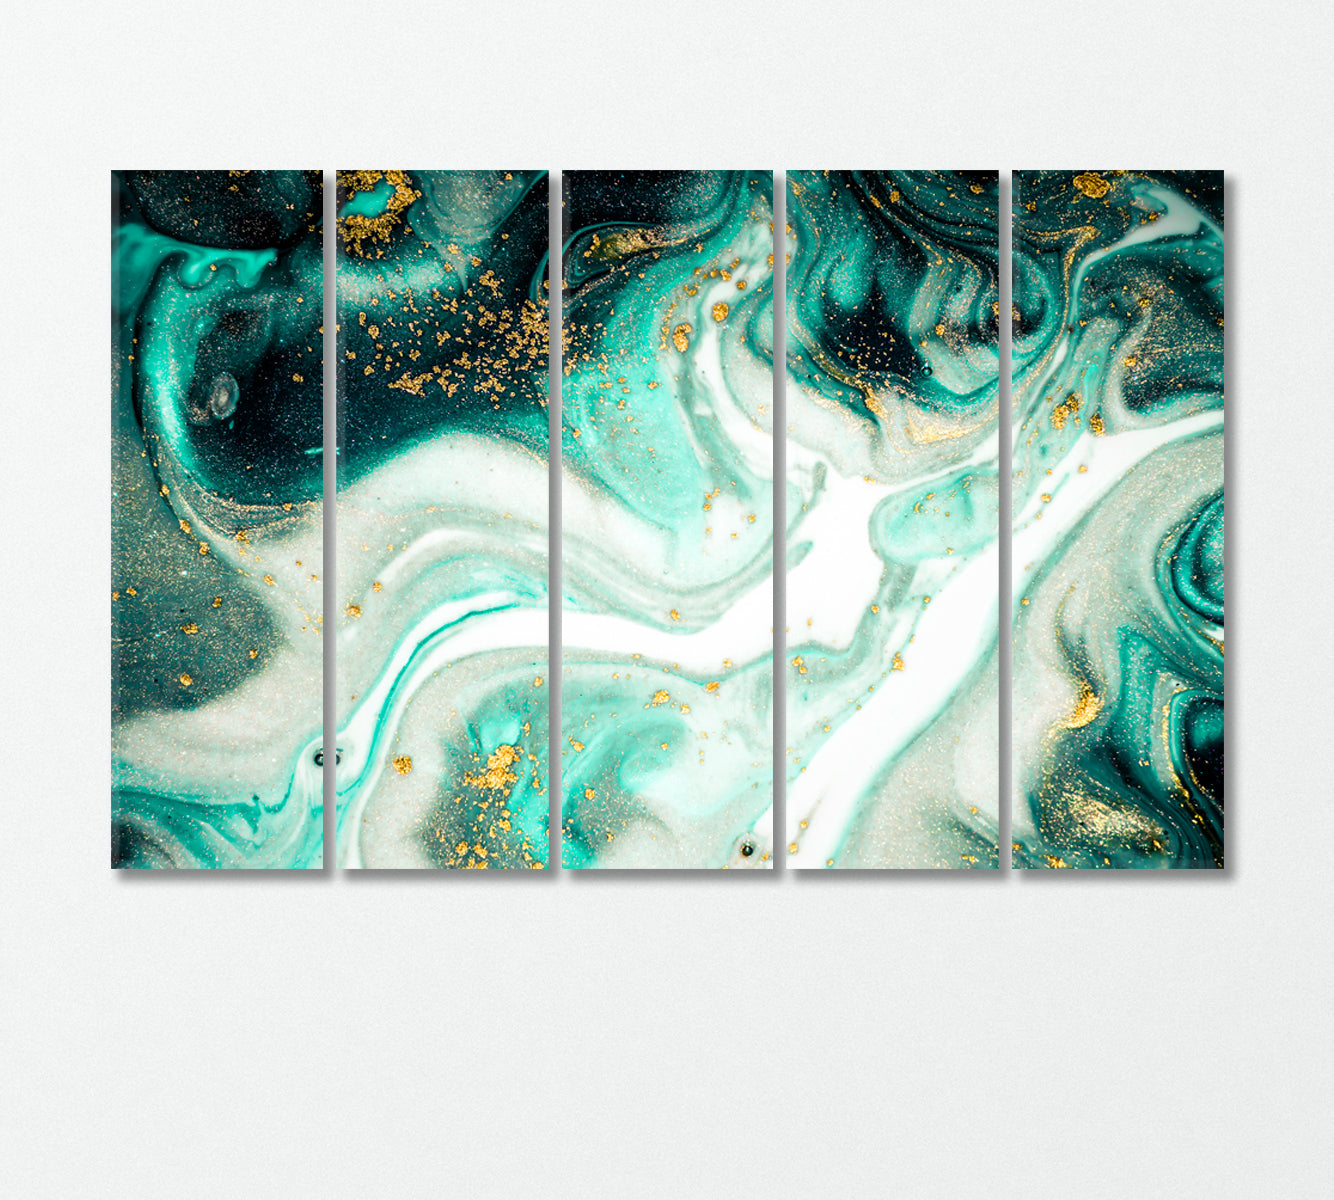 Abstract Oriental Turquoise Wave Pattern Canvas Print-Canvas Print-CetArt-5 Panels-36x24 inches-CetArt